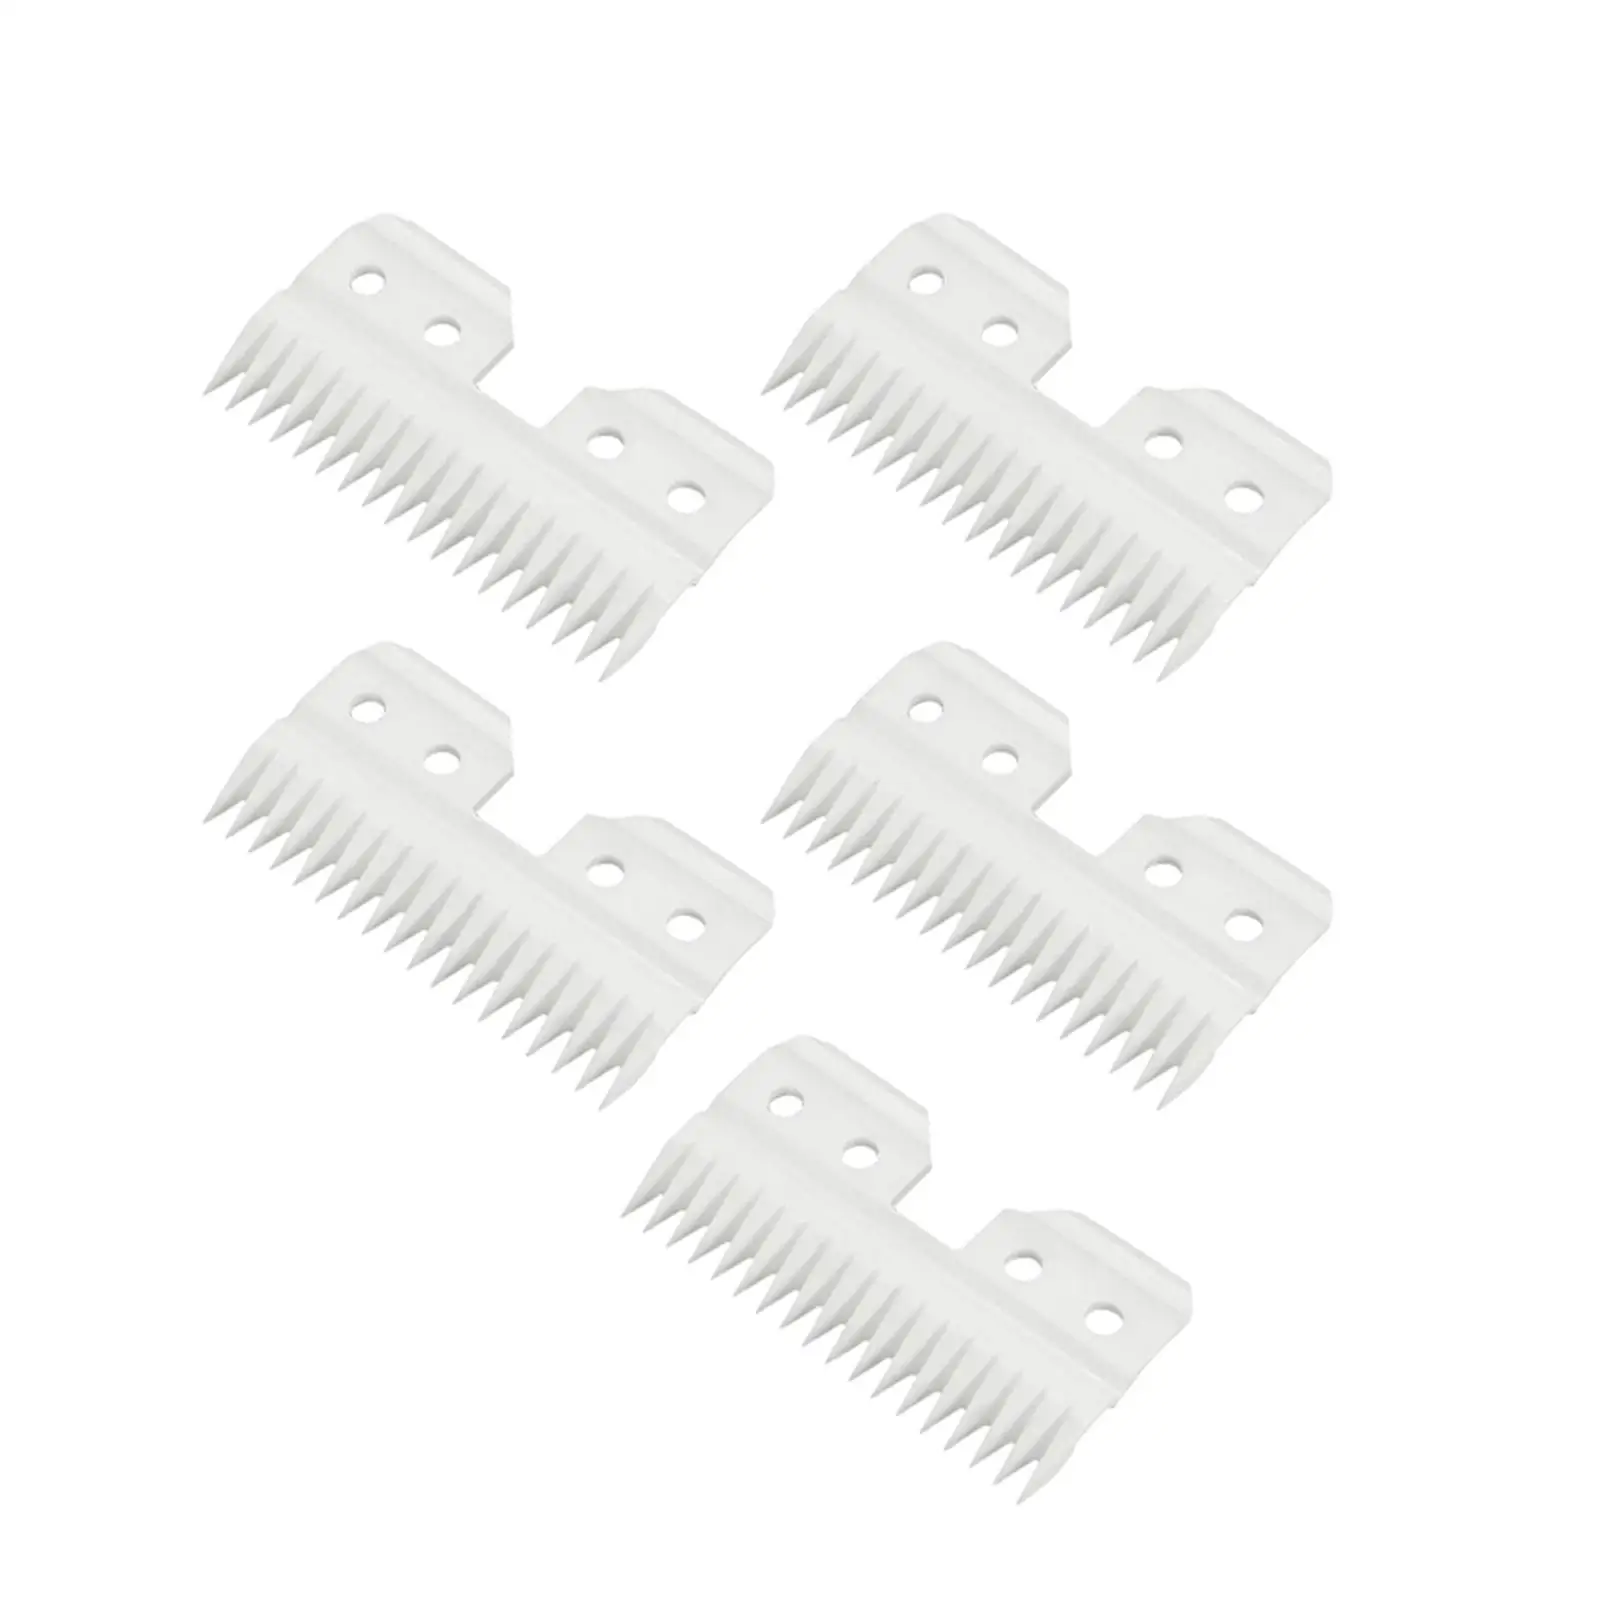 5x Dog Clippers 18 Tooth Trimmer Head Ceramics Tool Blade Head for A5 Series